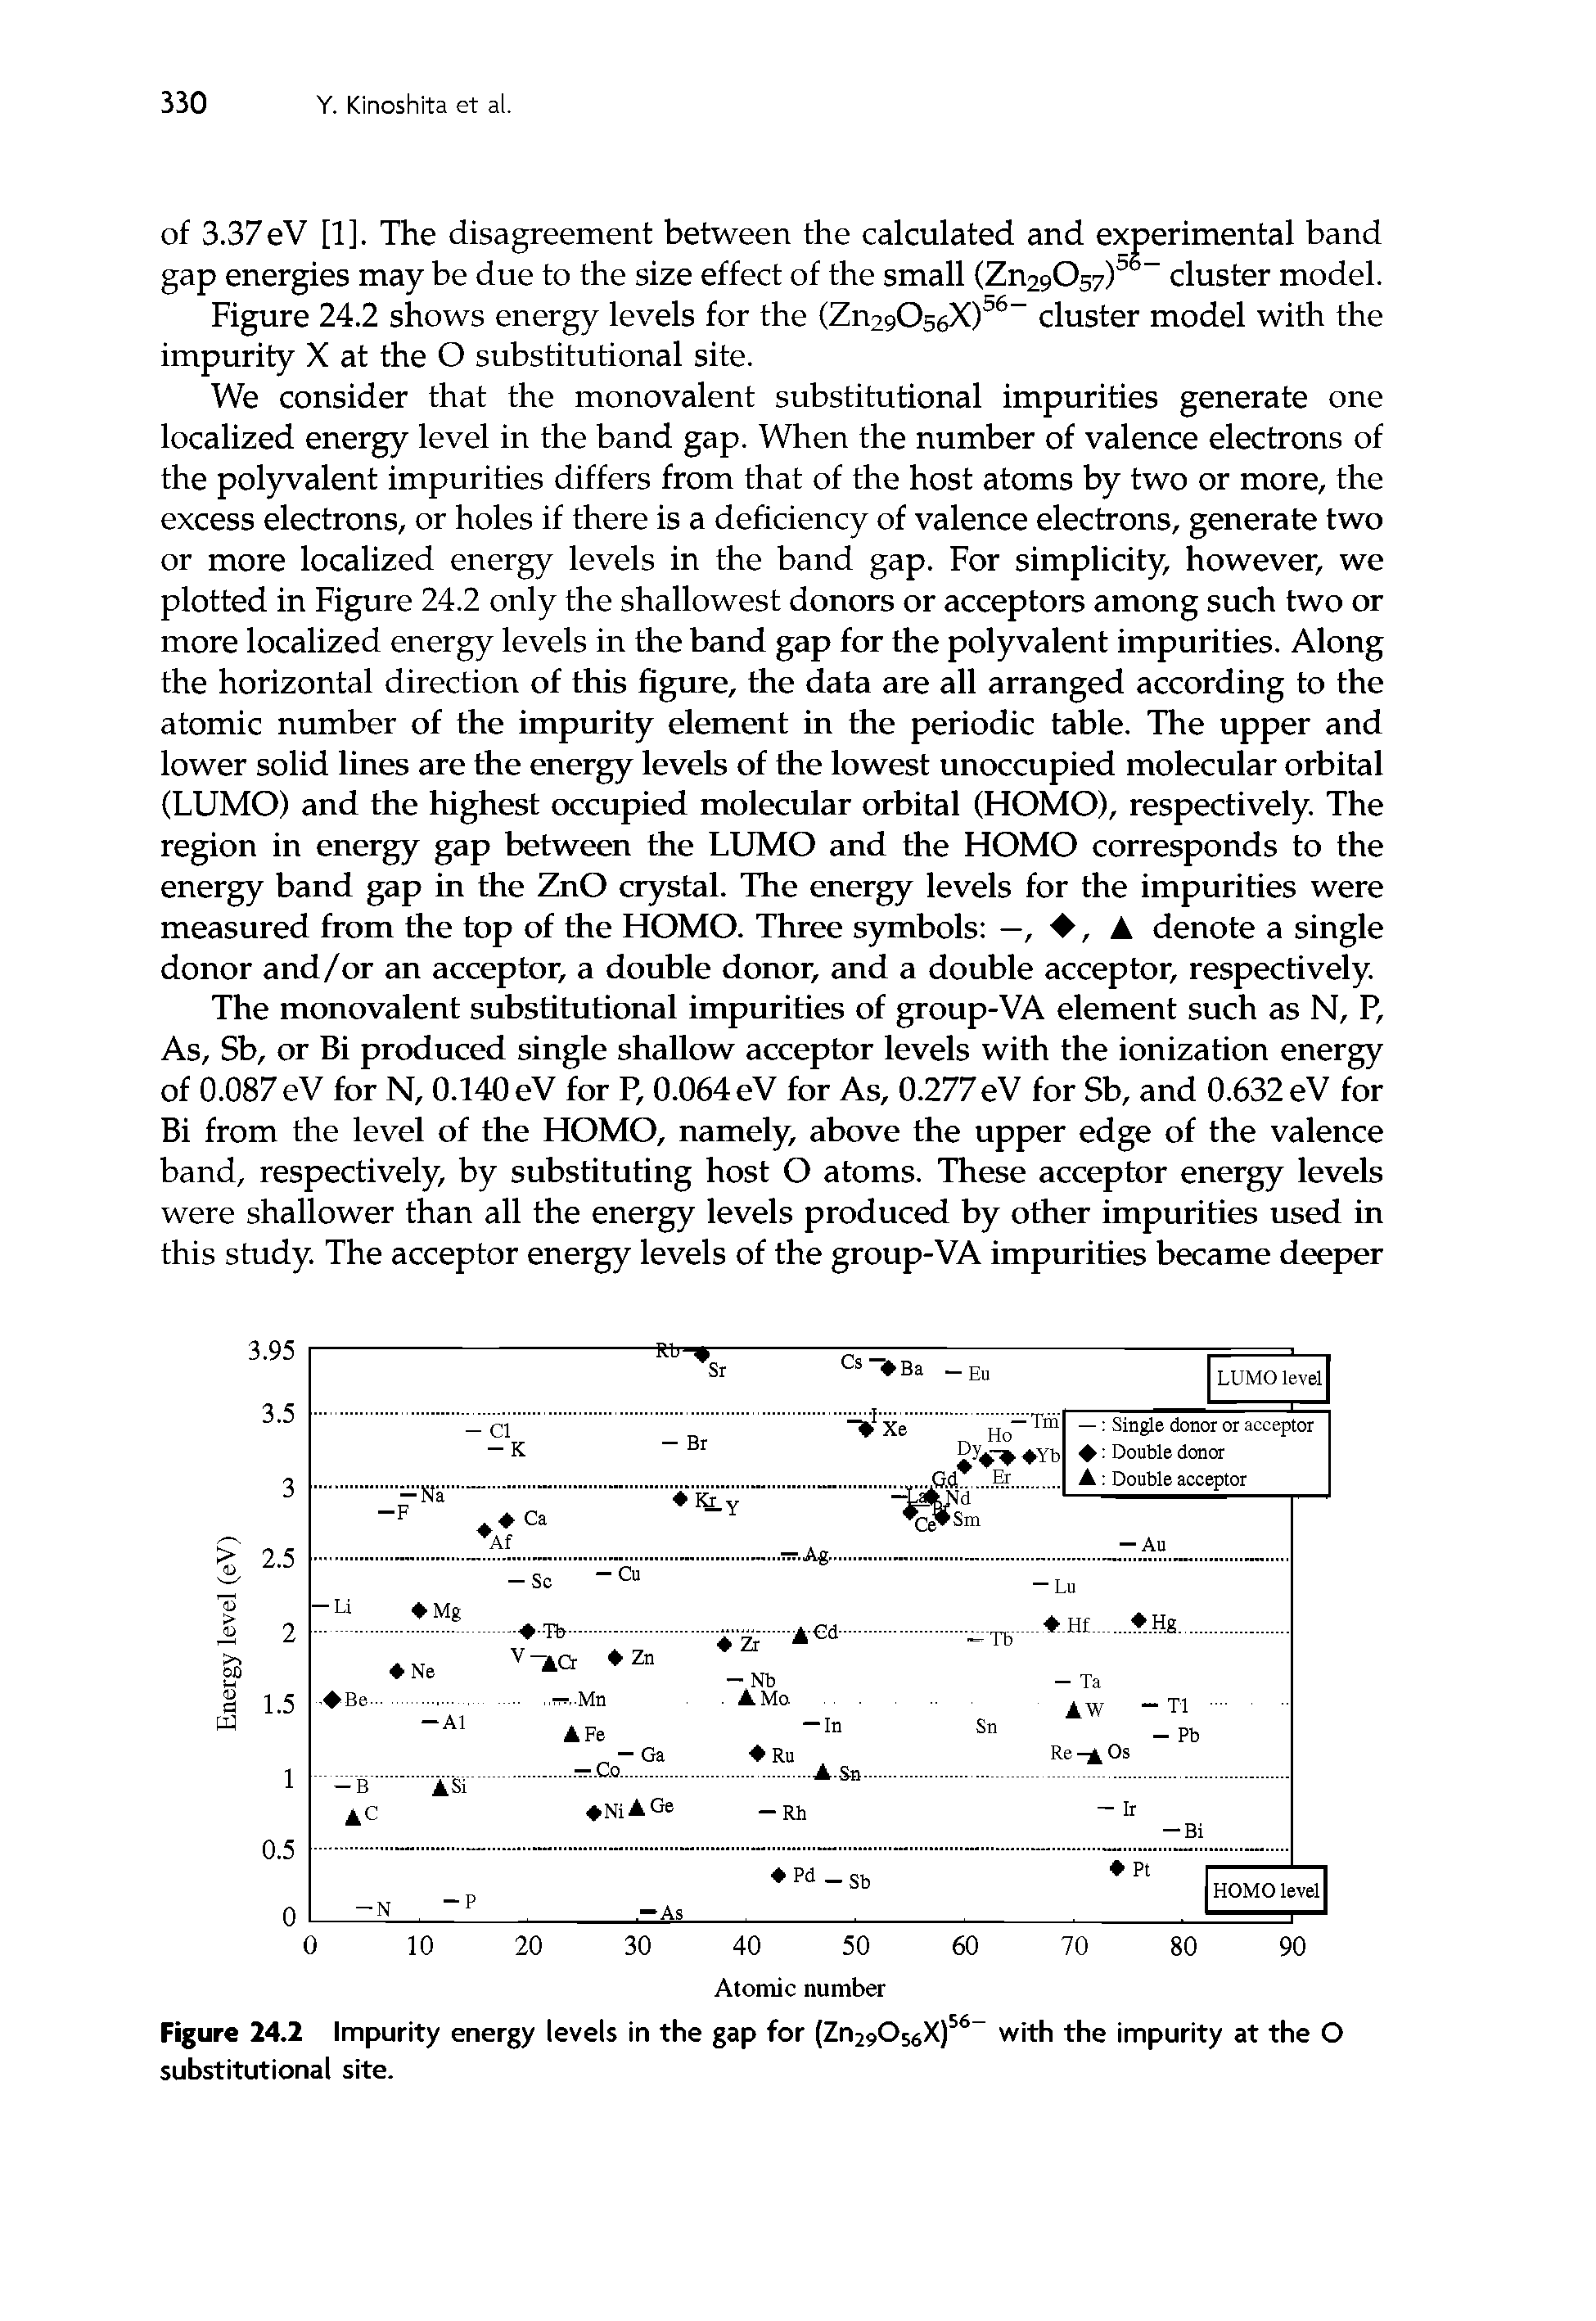 Figure 24.2 Impurity energy levels in the gap for (Zn29056X)56- with the impurity at the O substitutional site.